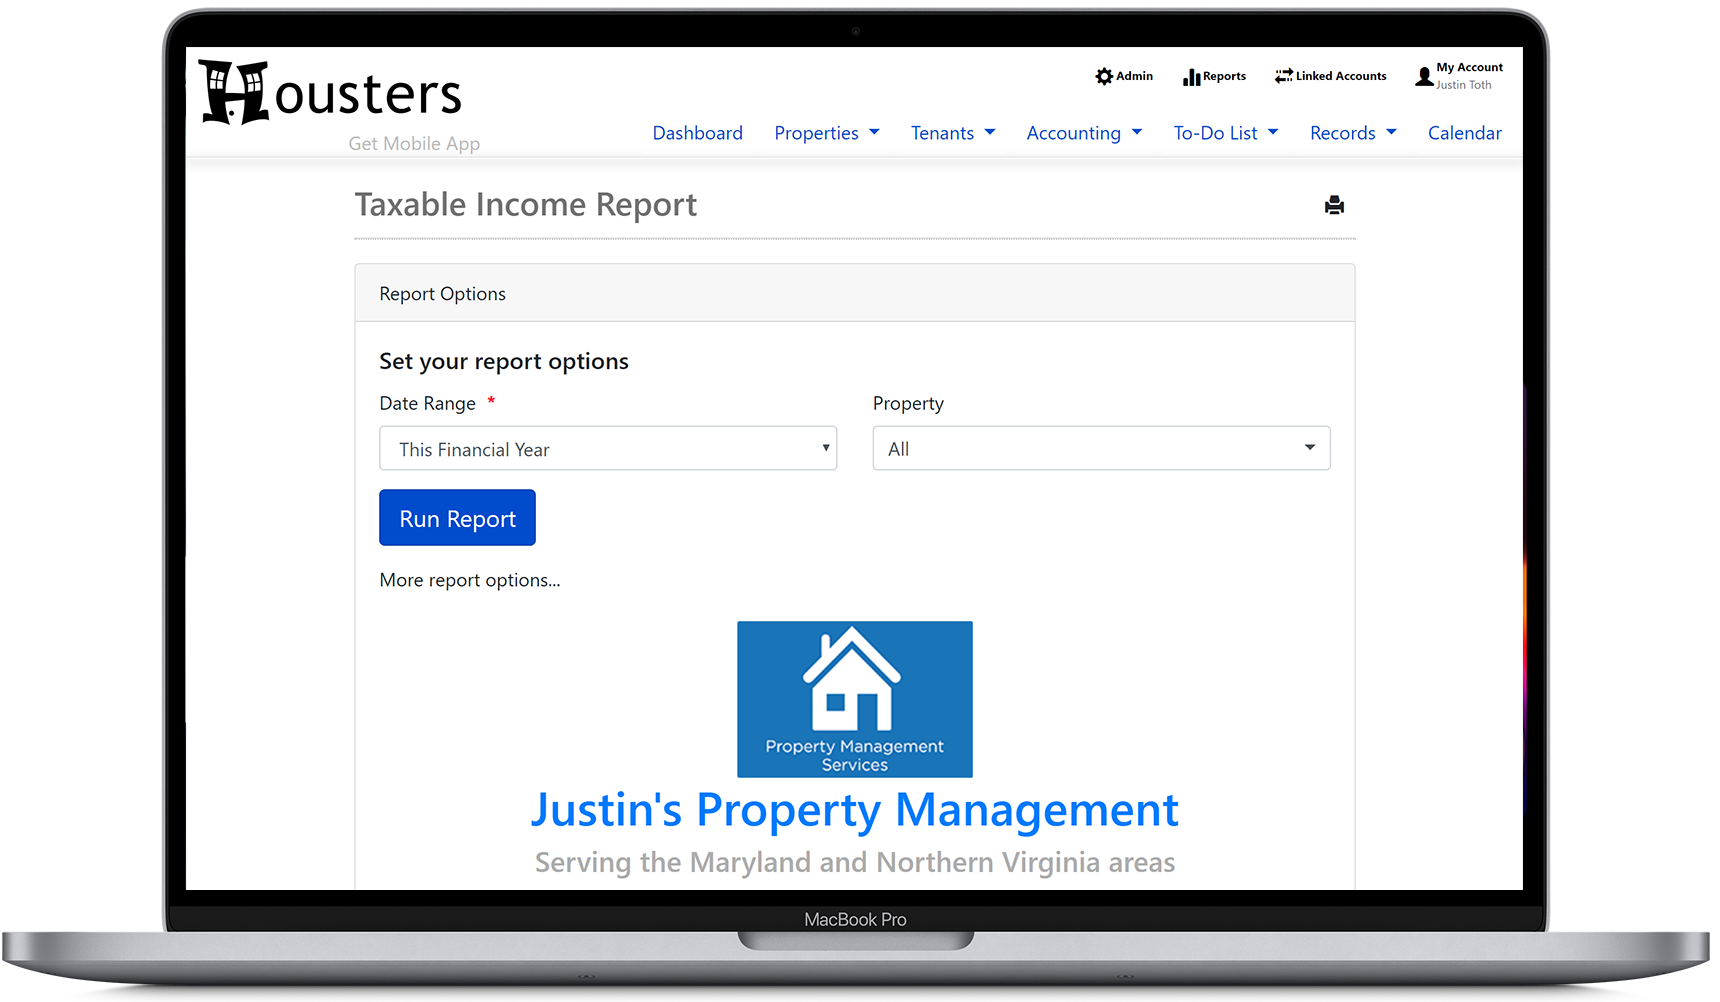 View a report showing how users can brand their rental reports